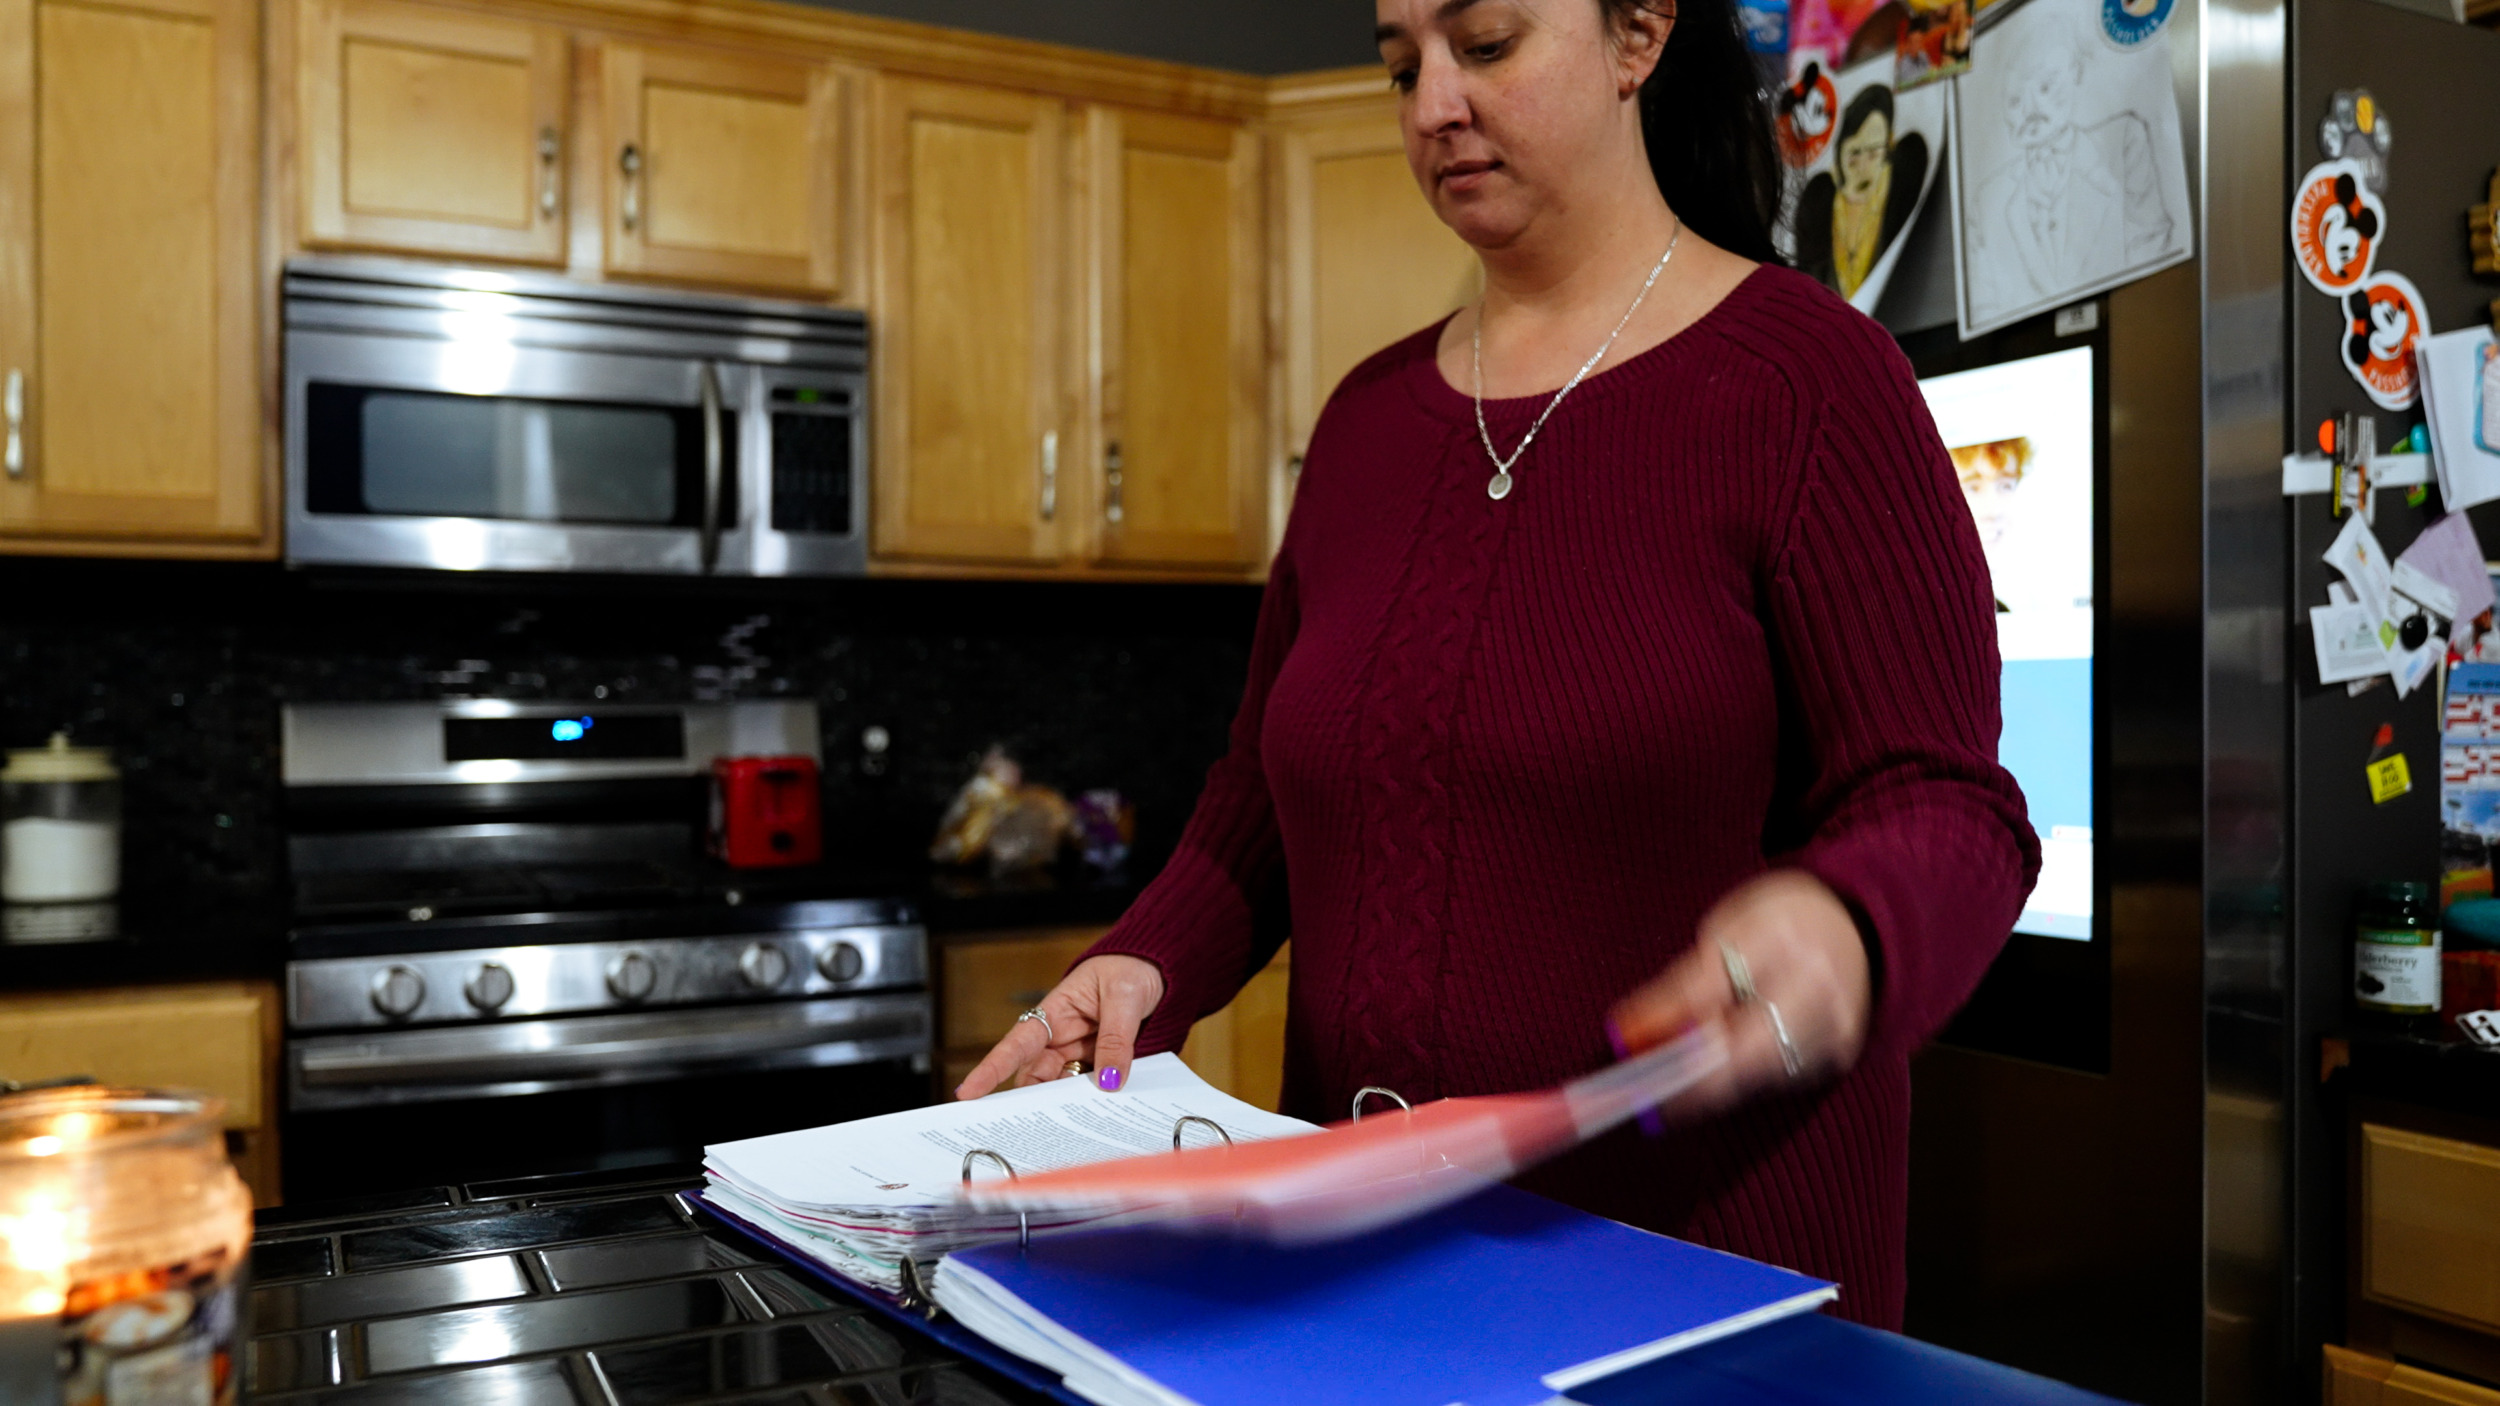 Long COVID — A woman with black hair wearing a silver chain with a round pendant on a maroon cable knit style sweater stands in front of kitchen island paging through a thick binder with many sections and papers.